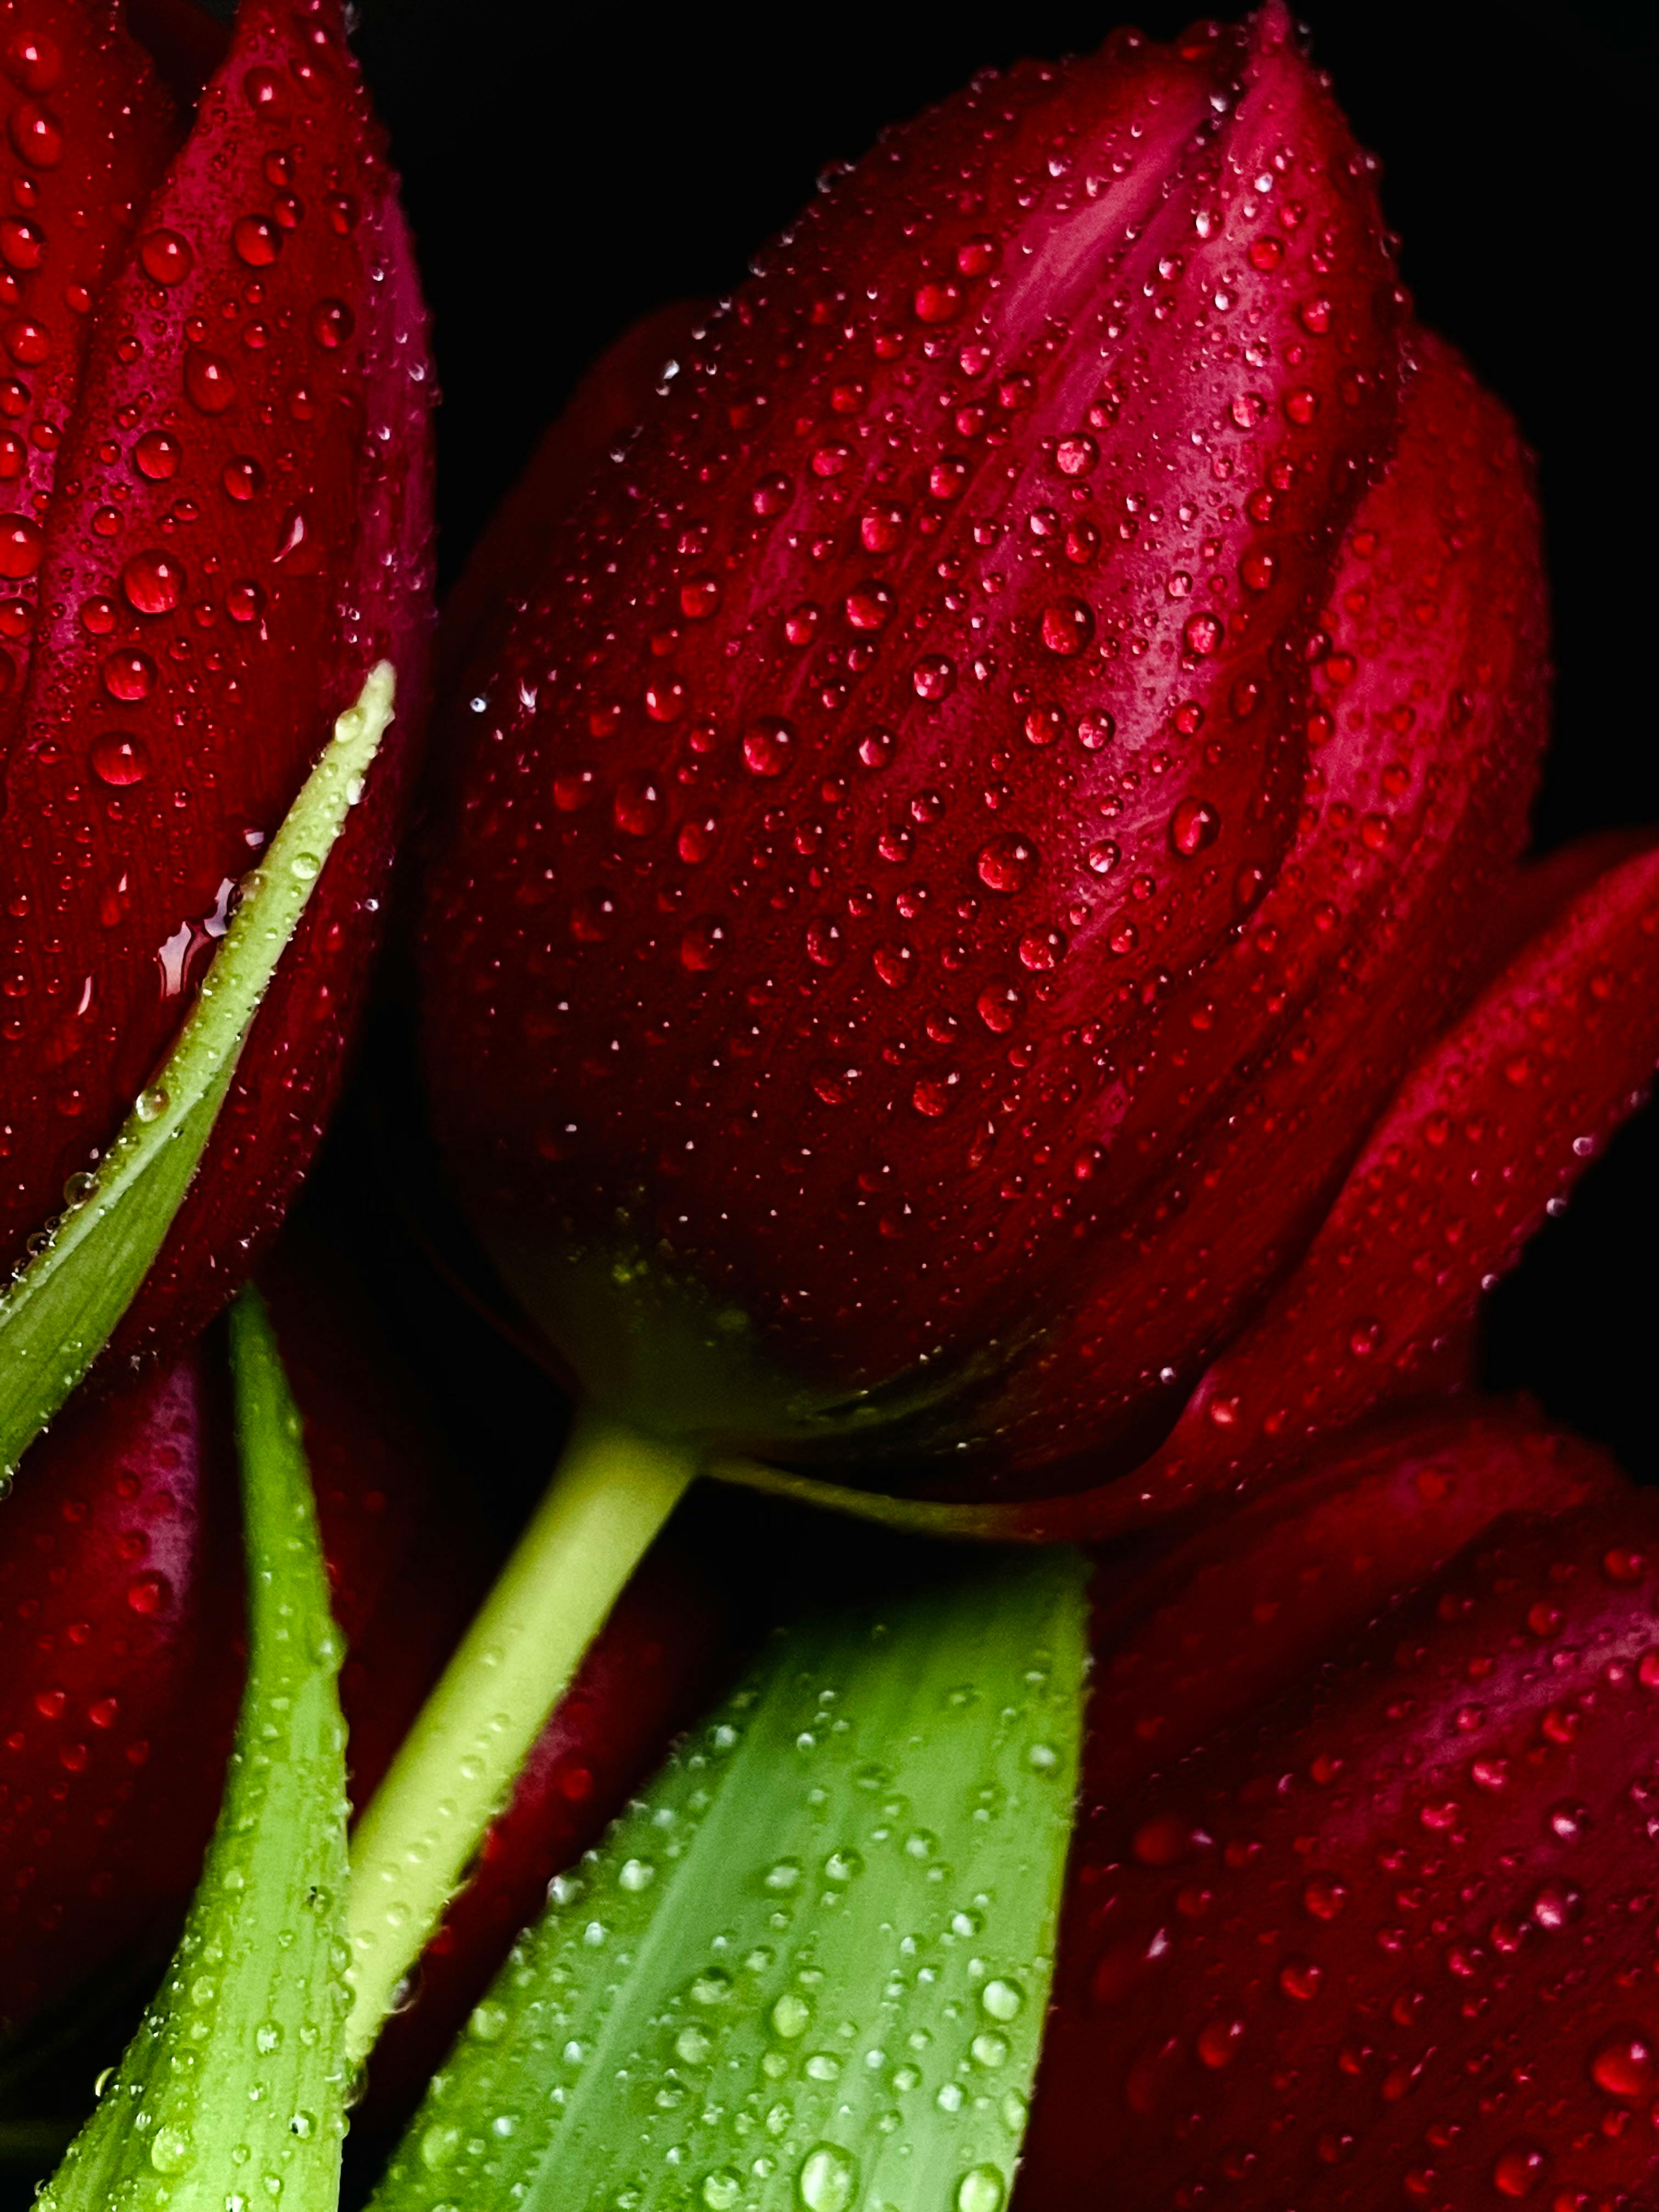 red tulips wallpaper